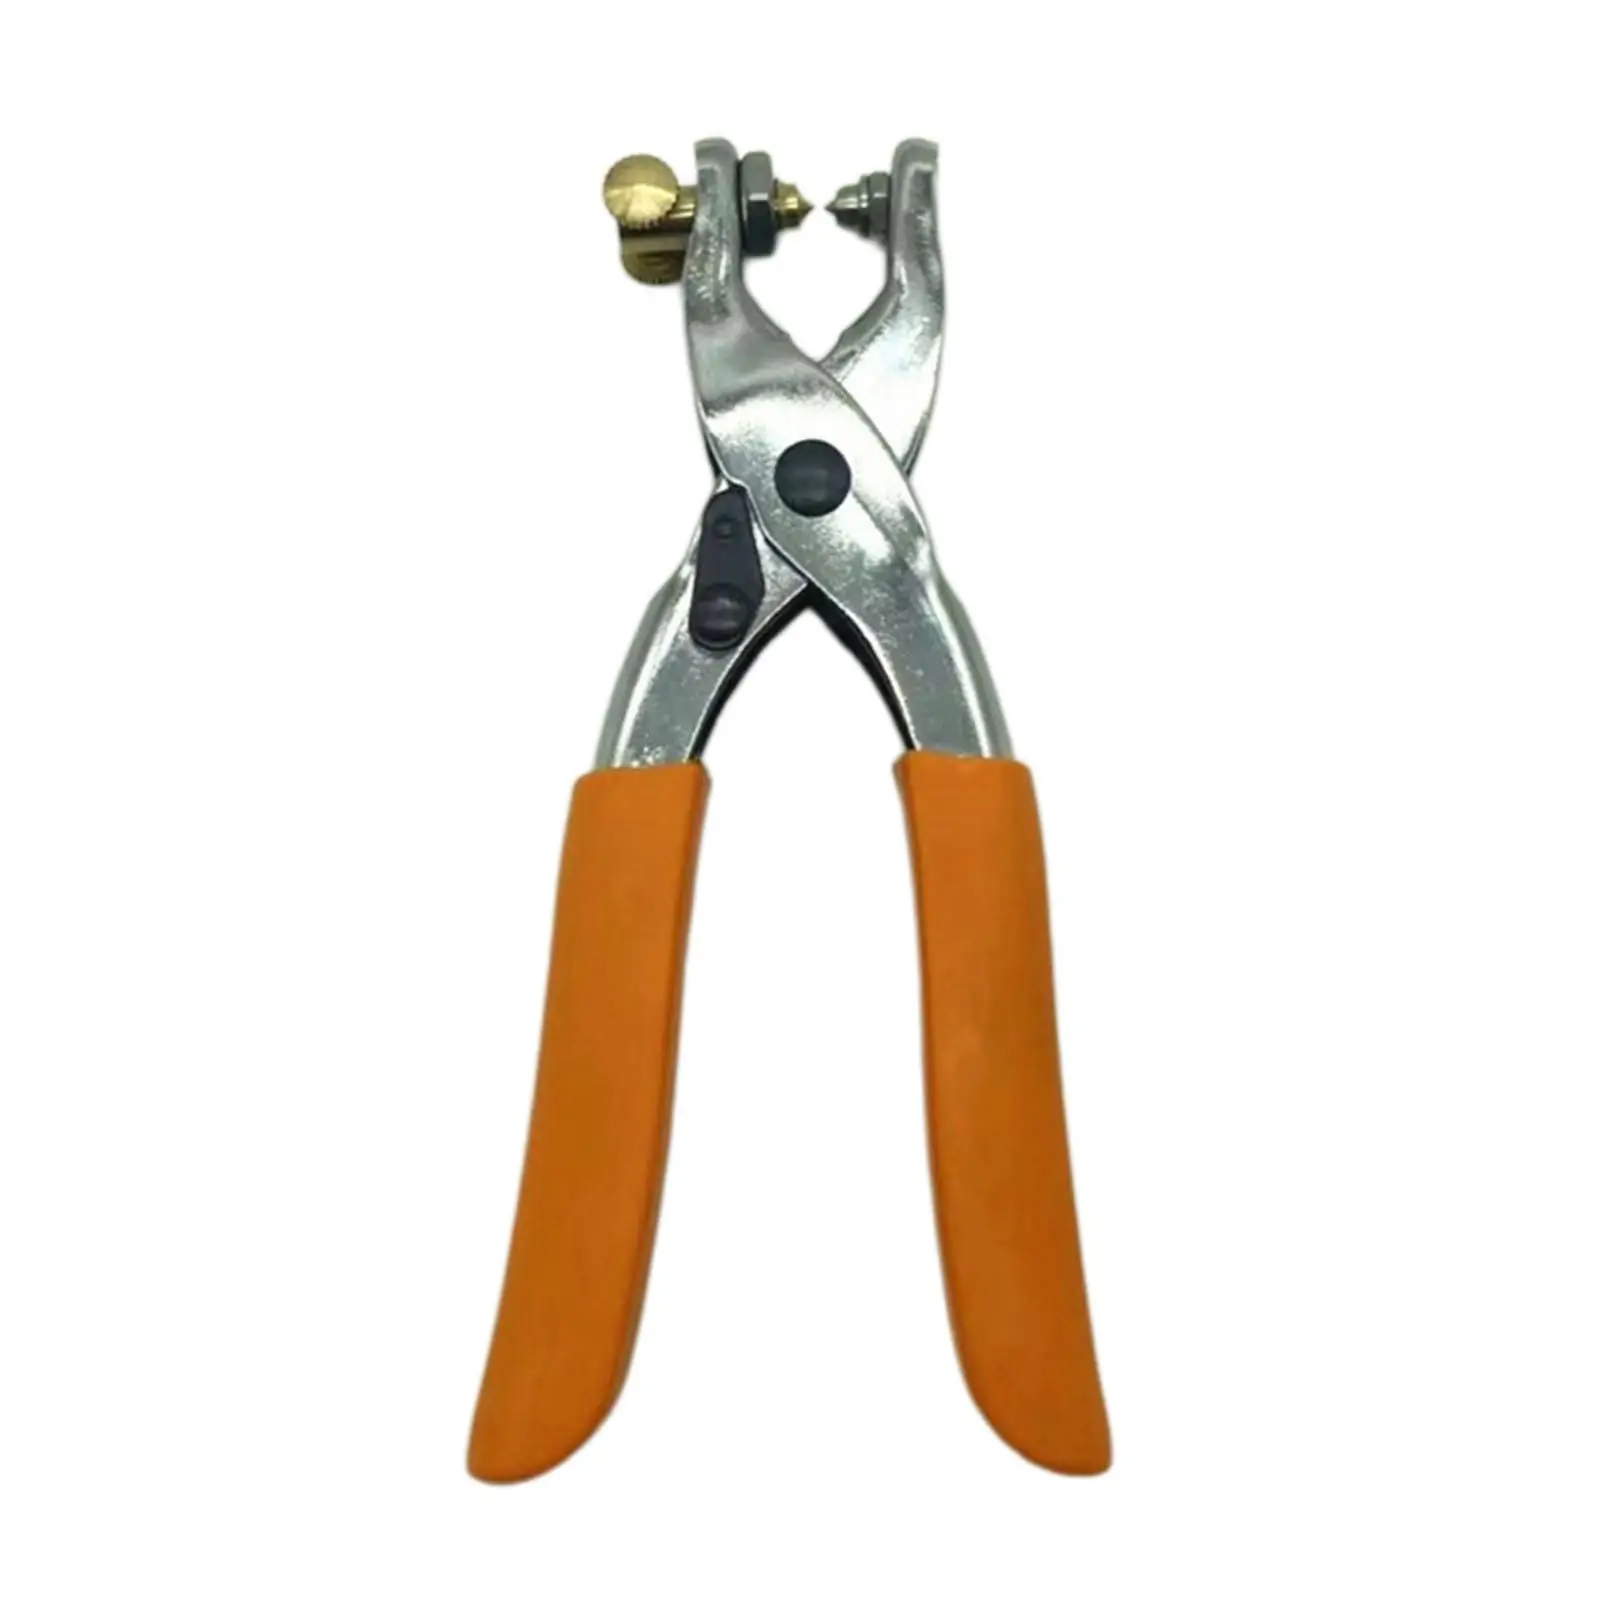 Pliers for Badminton Racket Grommet String Clamp Racket Threading Pincer Forceps Accessories